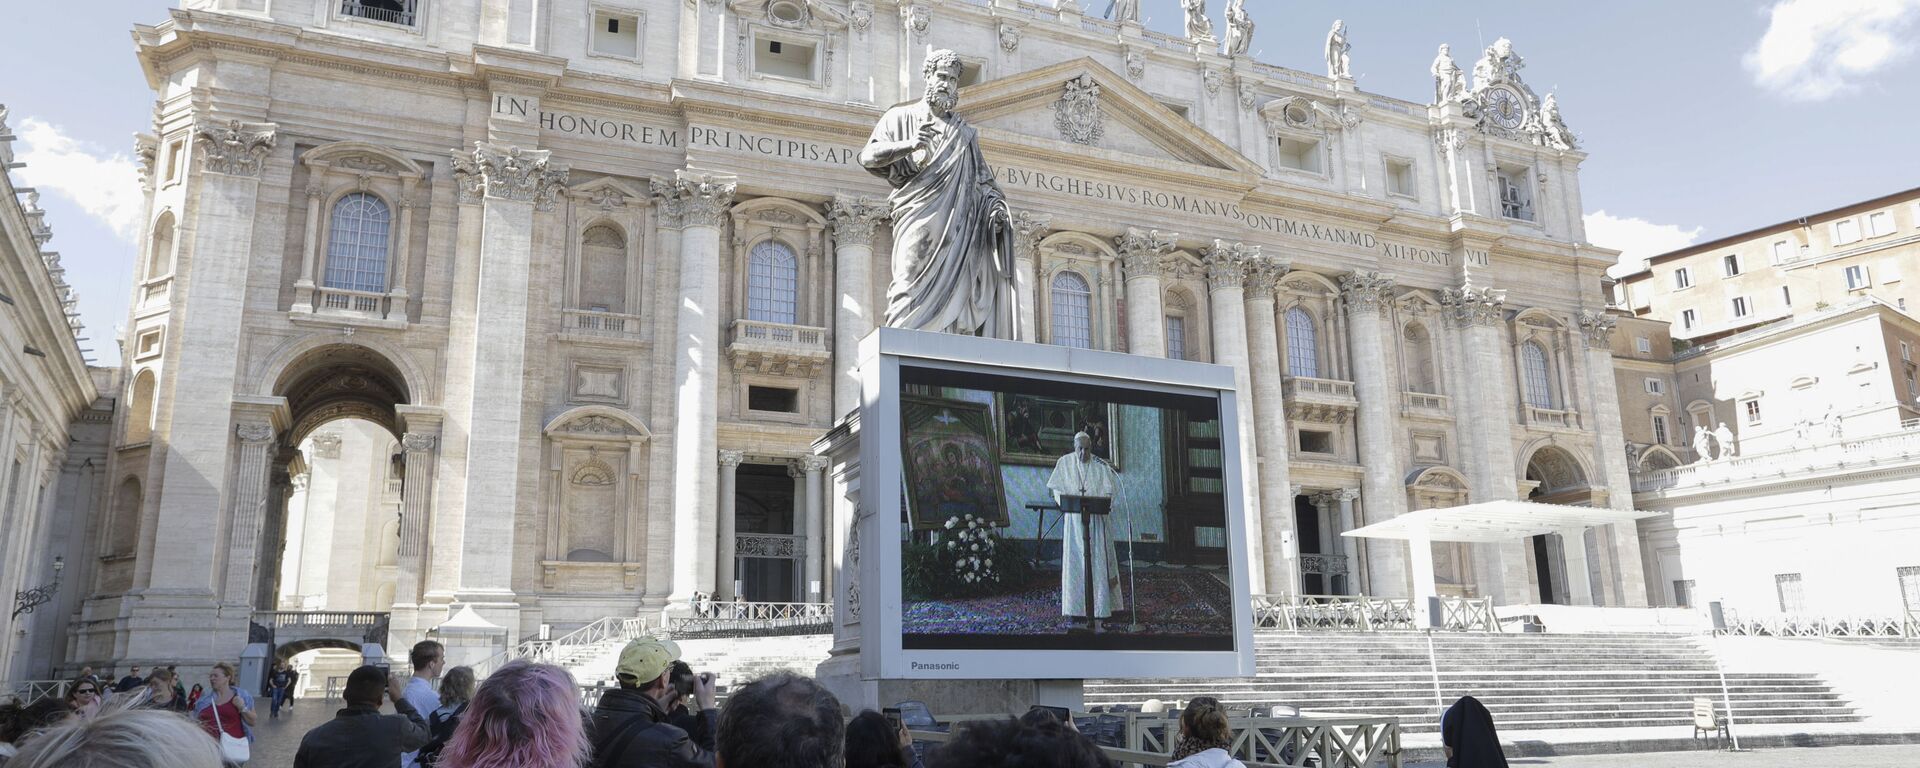 Faithful watch Pope Francis deliver the Angelus prayer on a giant screen to avoid crowds gathering, in St. Peter's Square, at the Vatican, Sunday, 8 March 2020. The pope in his streamed remarks said he was close in prayers to those suffering from the coronavirus and to those caring for them. - Sputnik International, 1920, 06.09.2020